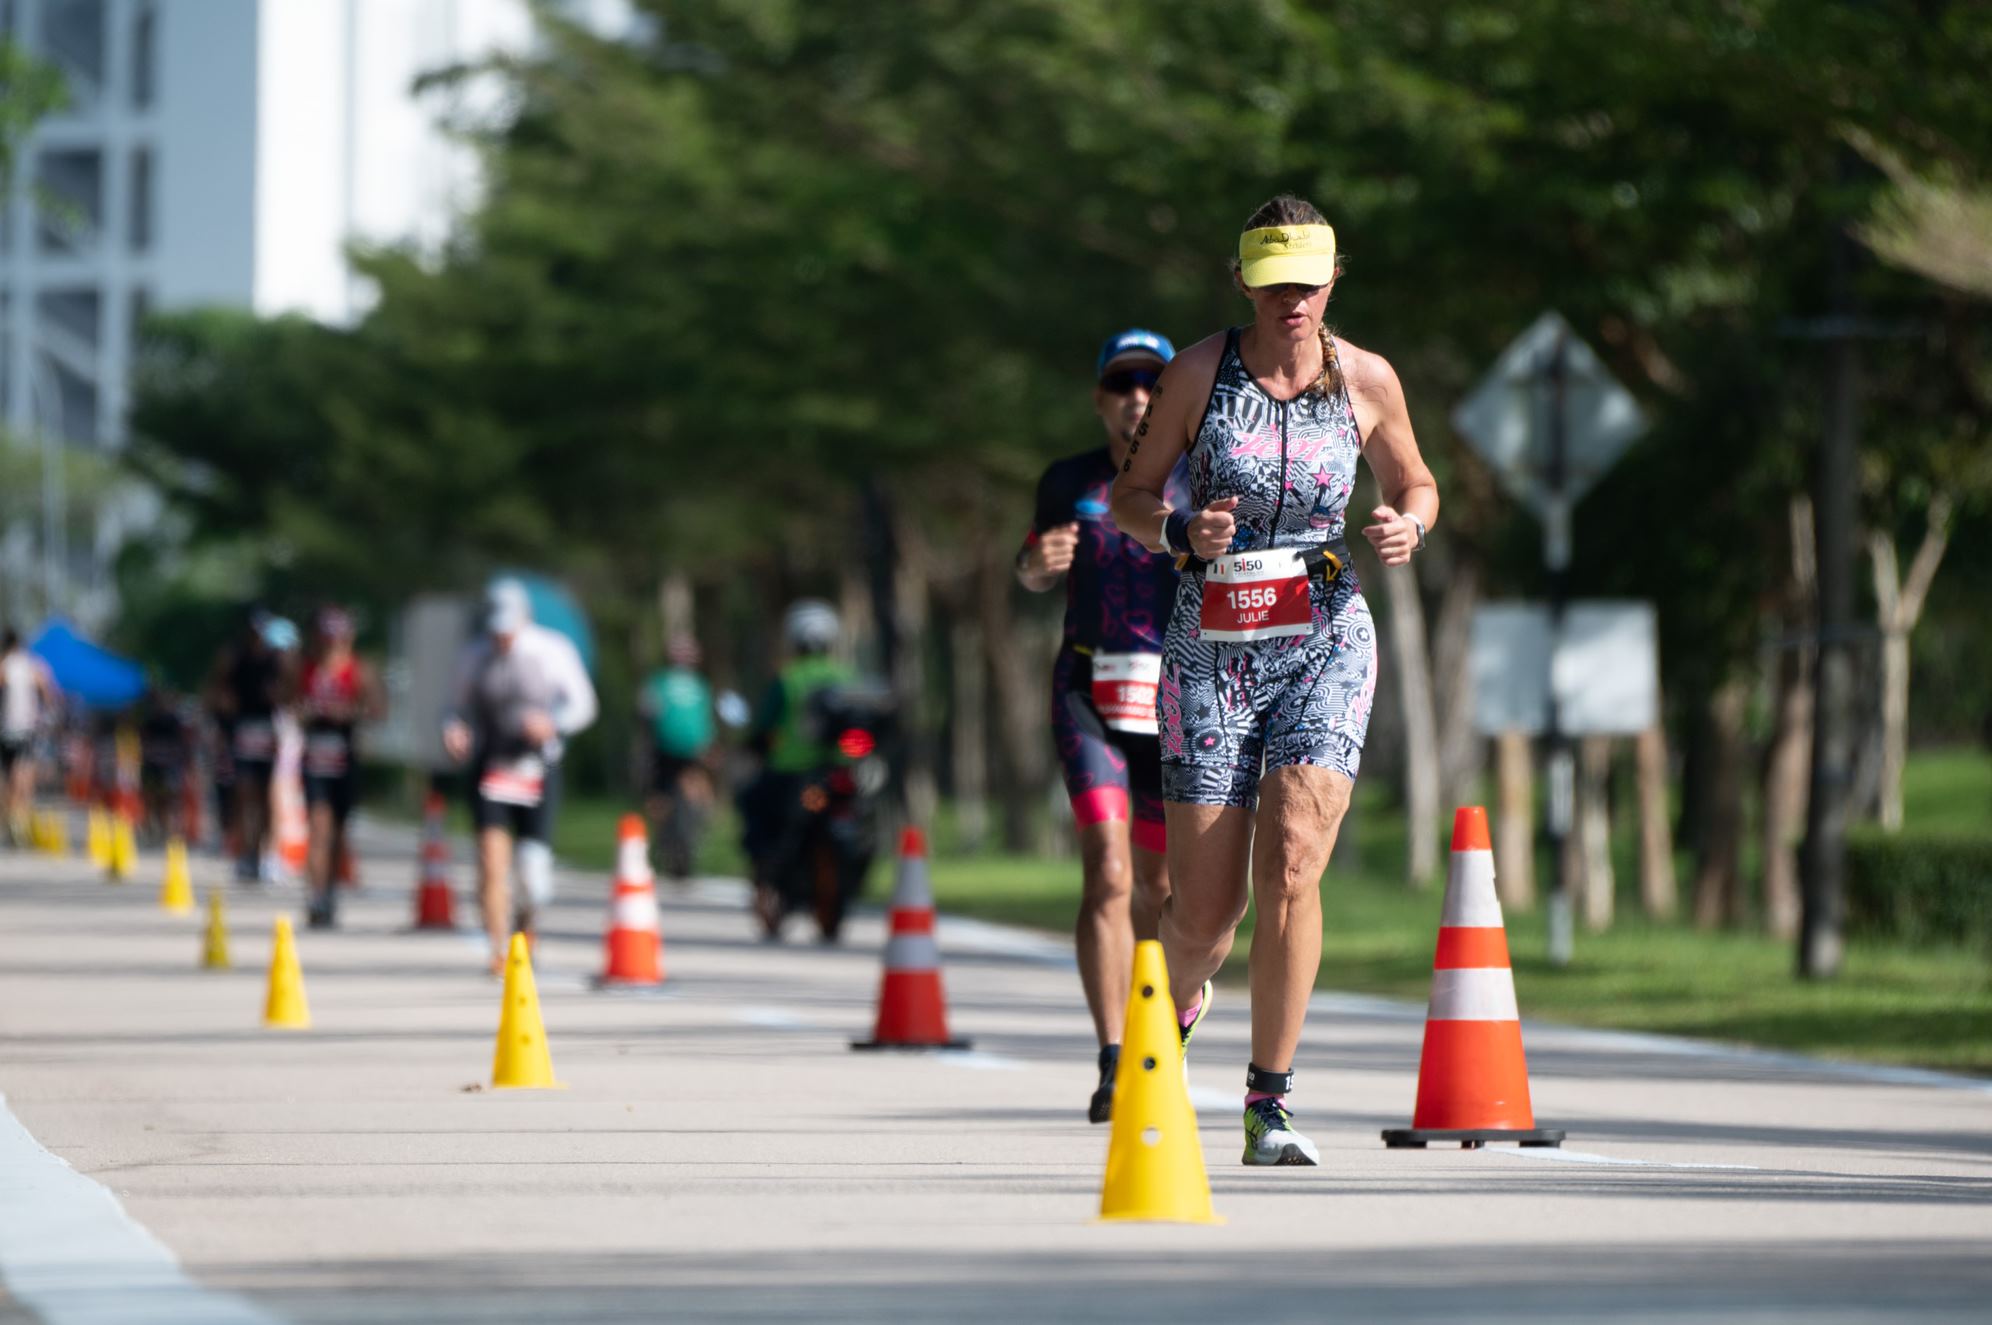 Interview with Singapore's First Full-Time Triathlete: Choo Ling Er